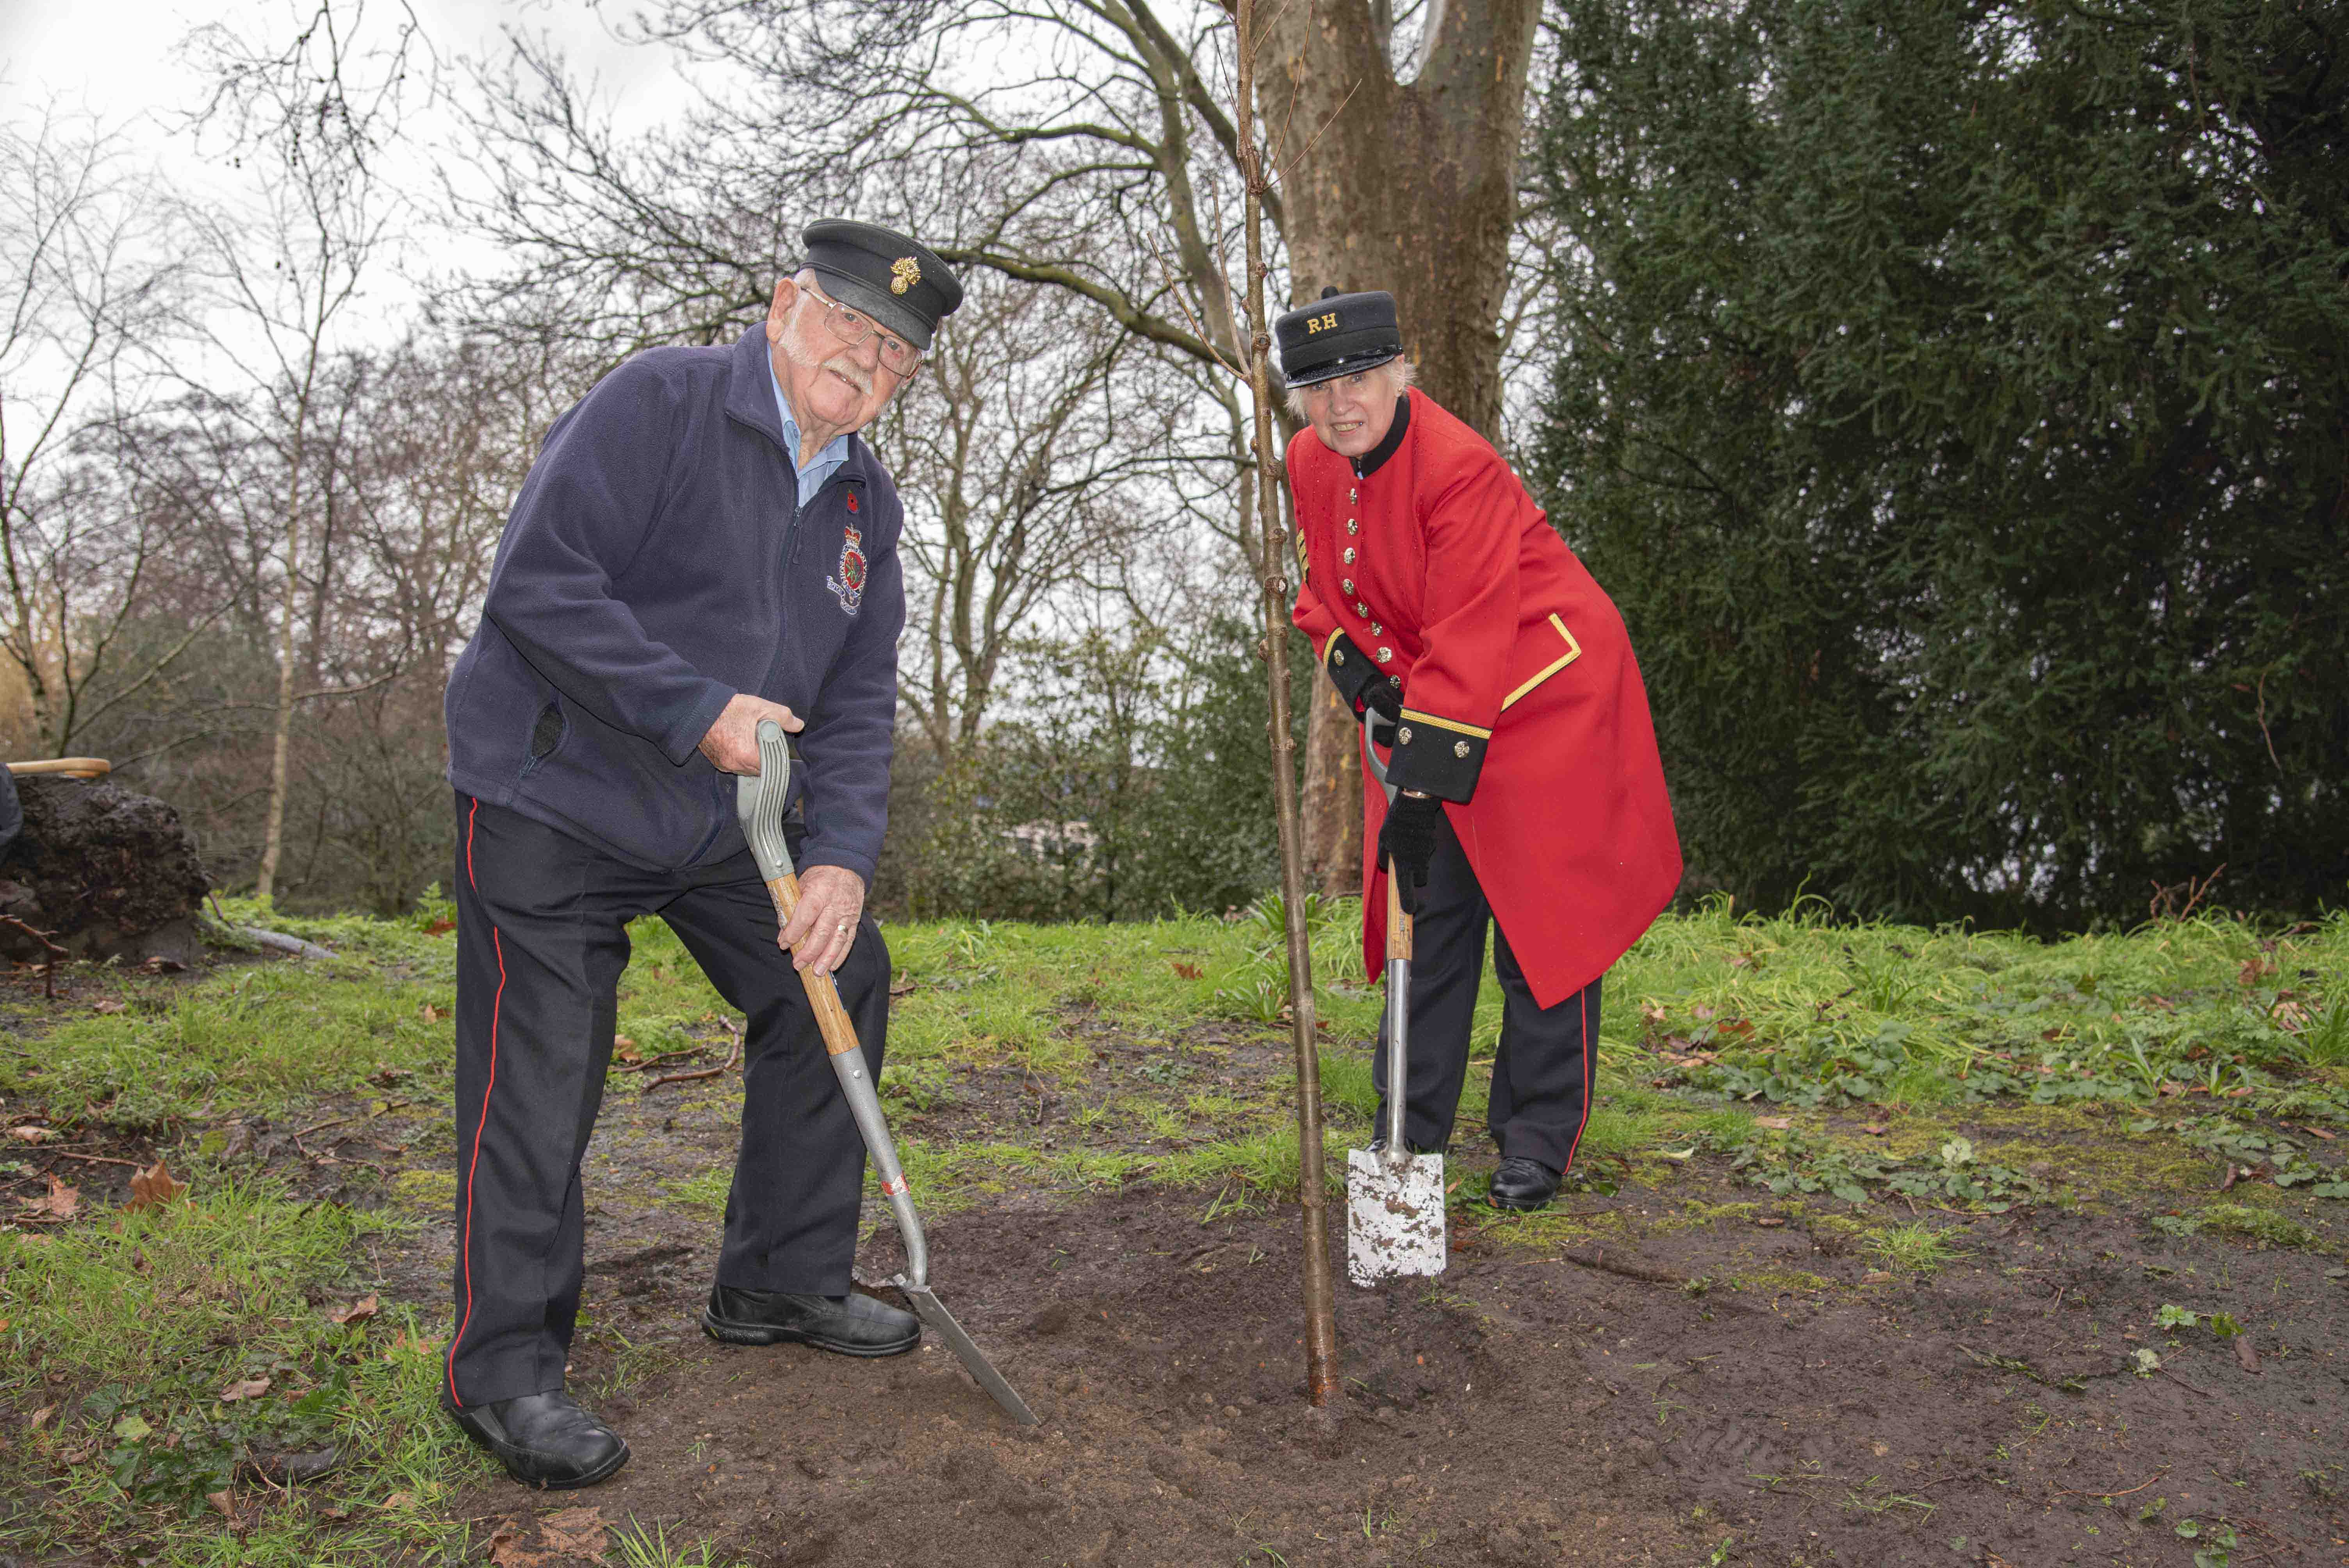 Chelsea Pensioners planting an Elm tree in Ranelagh Gardens